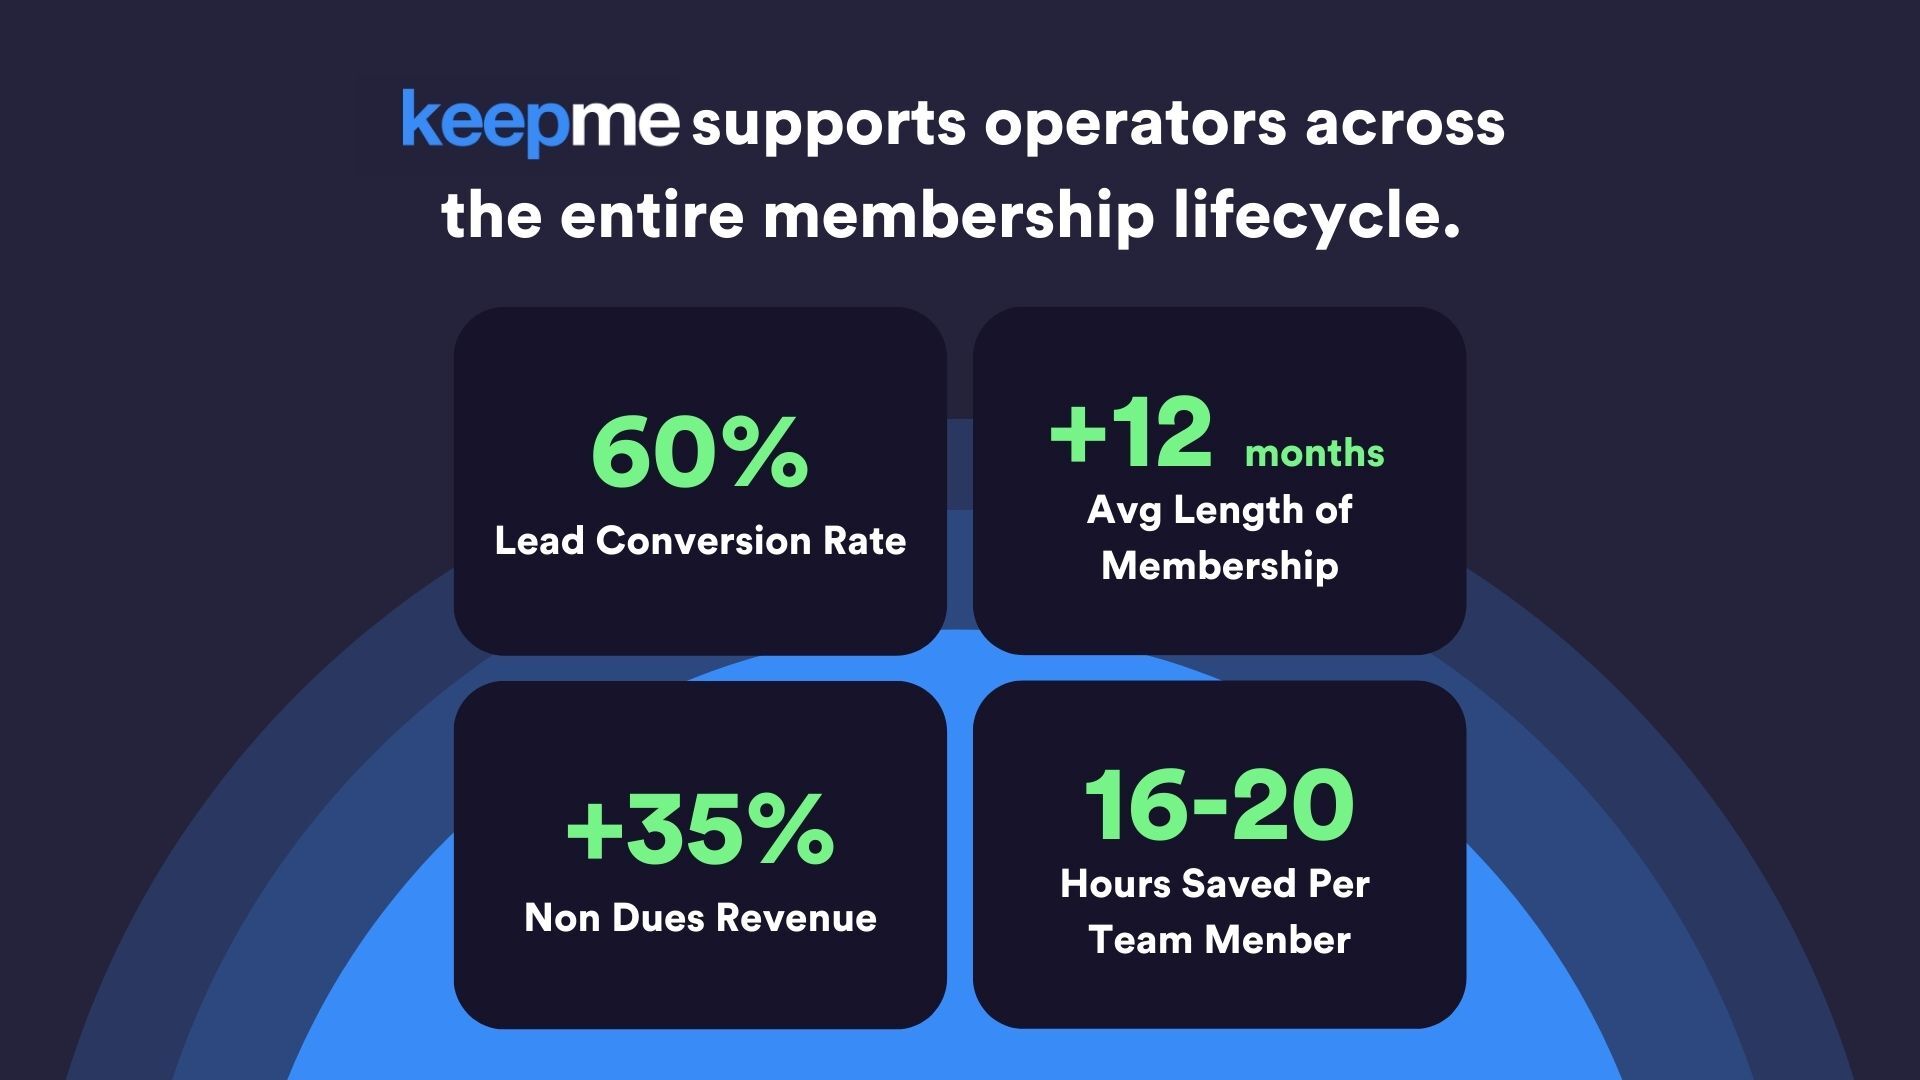 Supports operators across the membership lifecycle